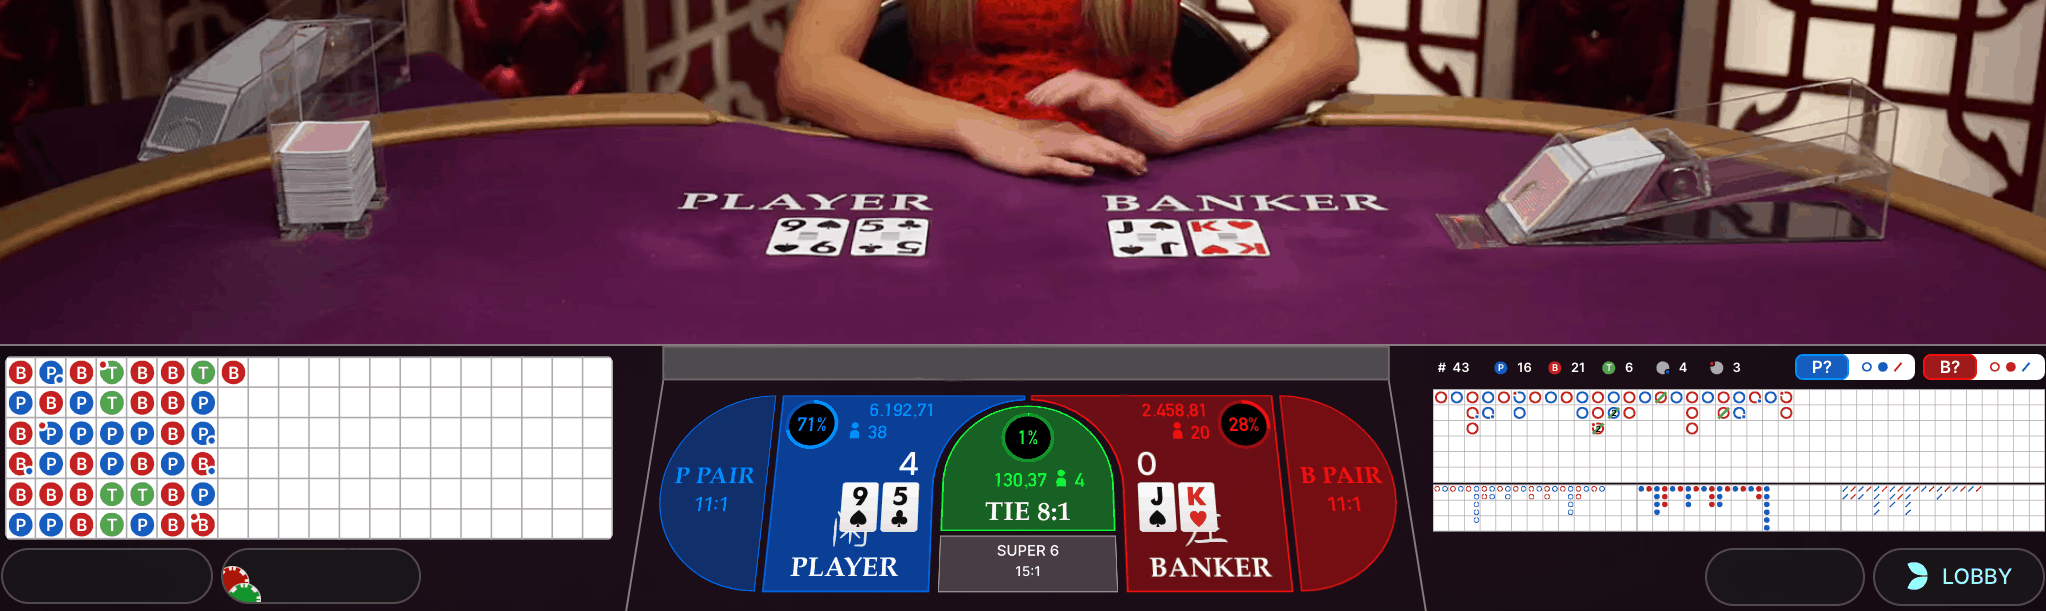 screenshot of the baccarat road interface at an online baccarat table